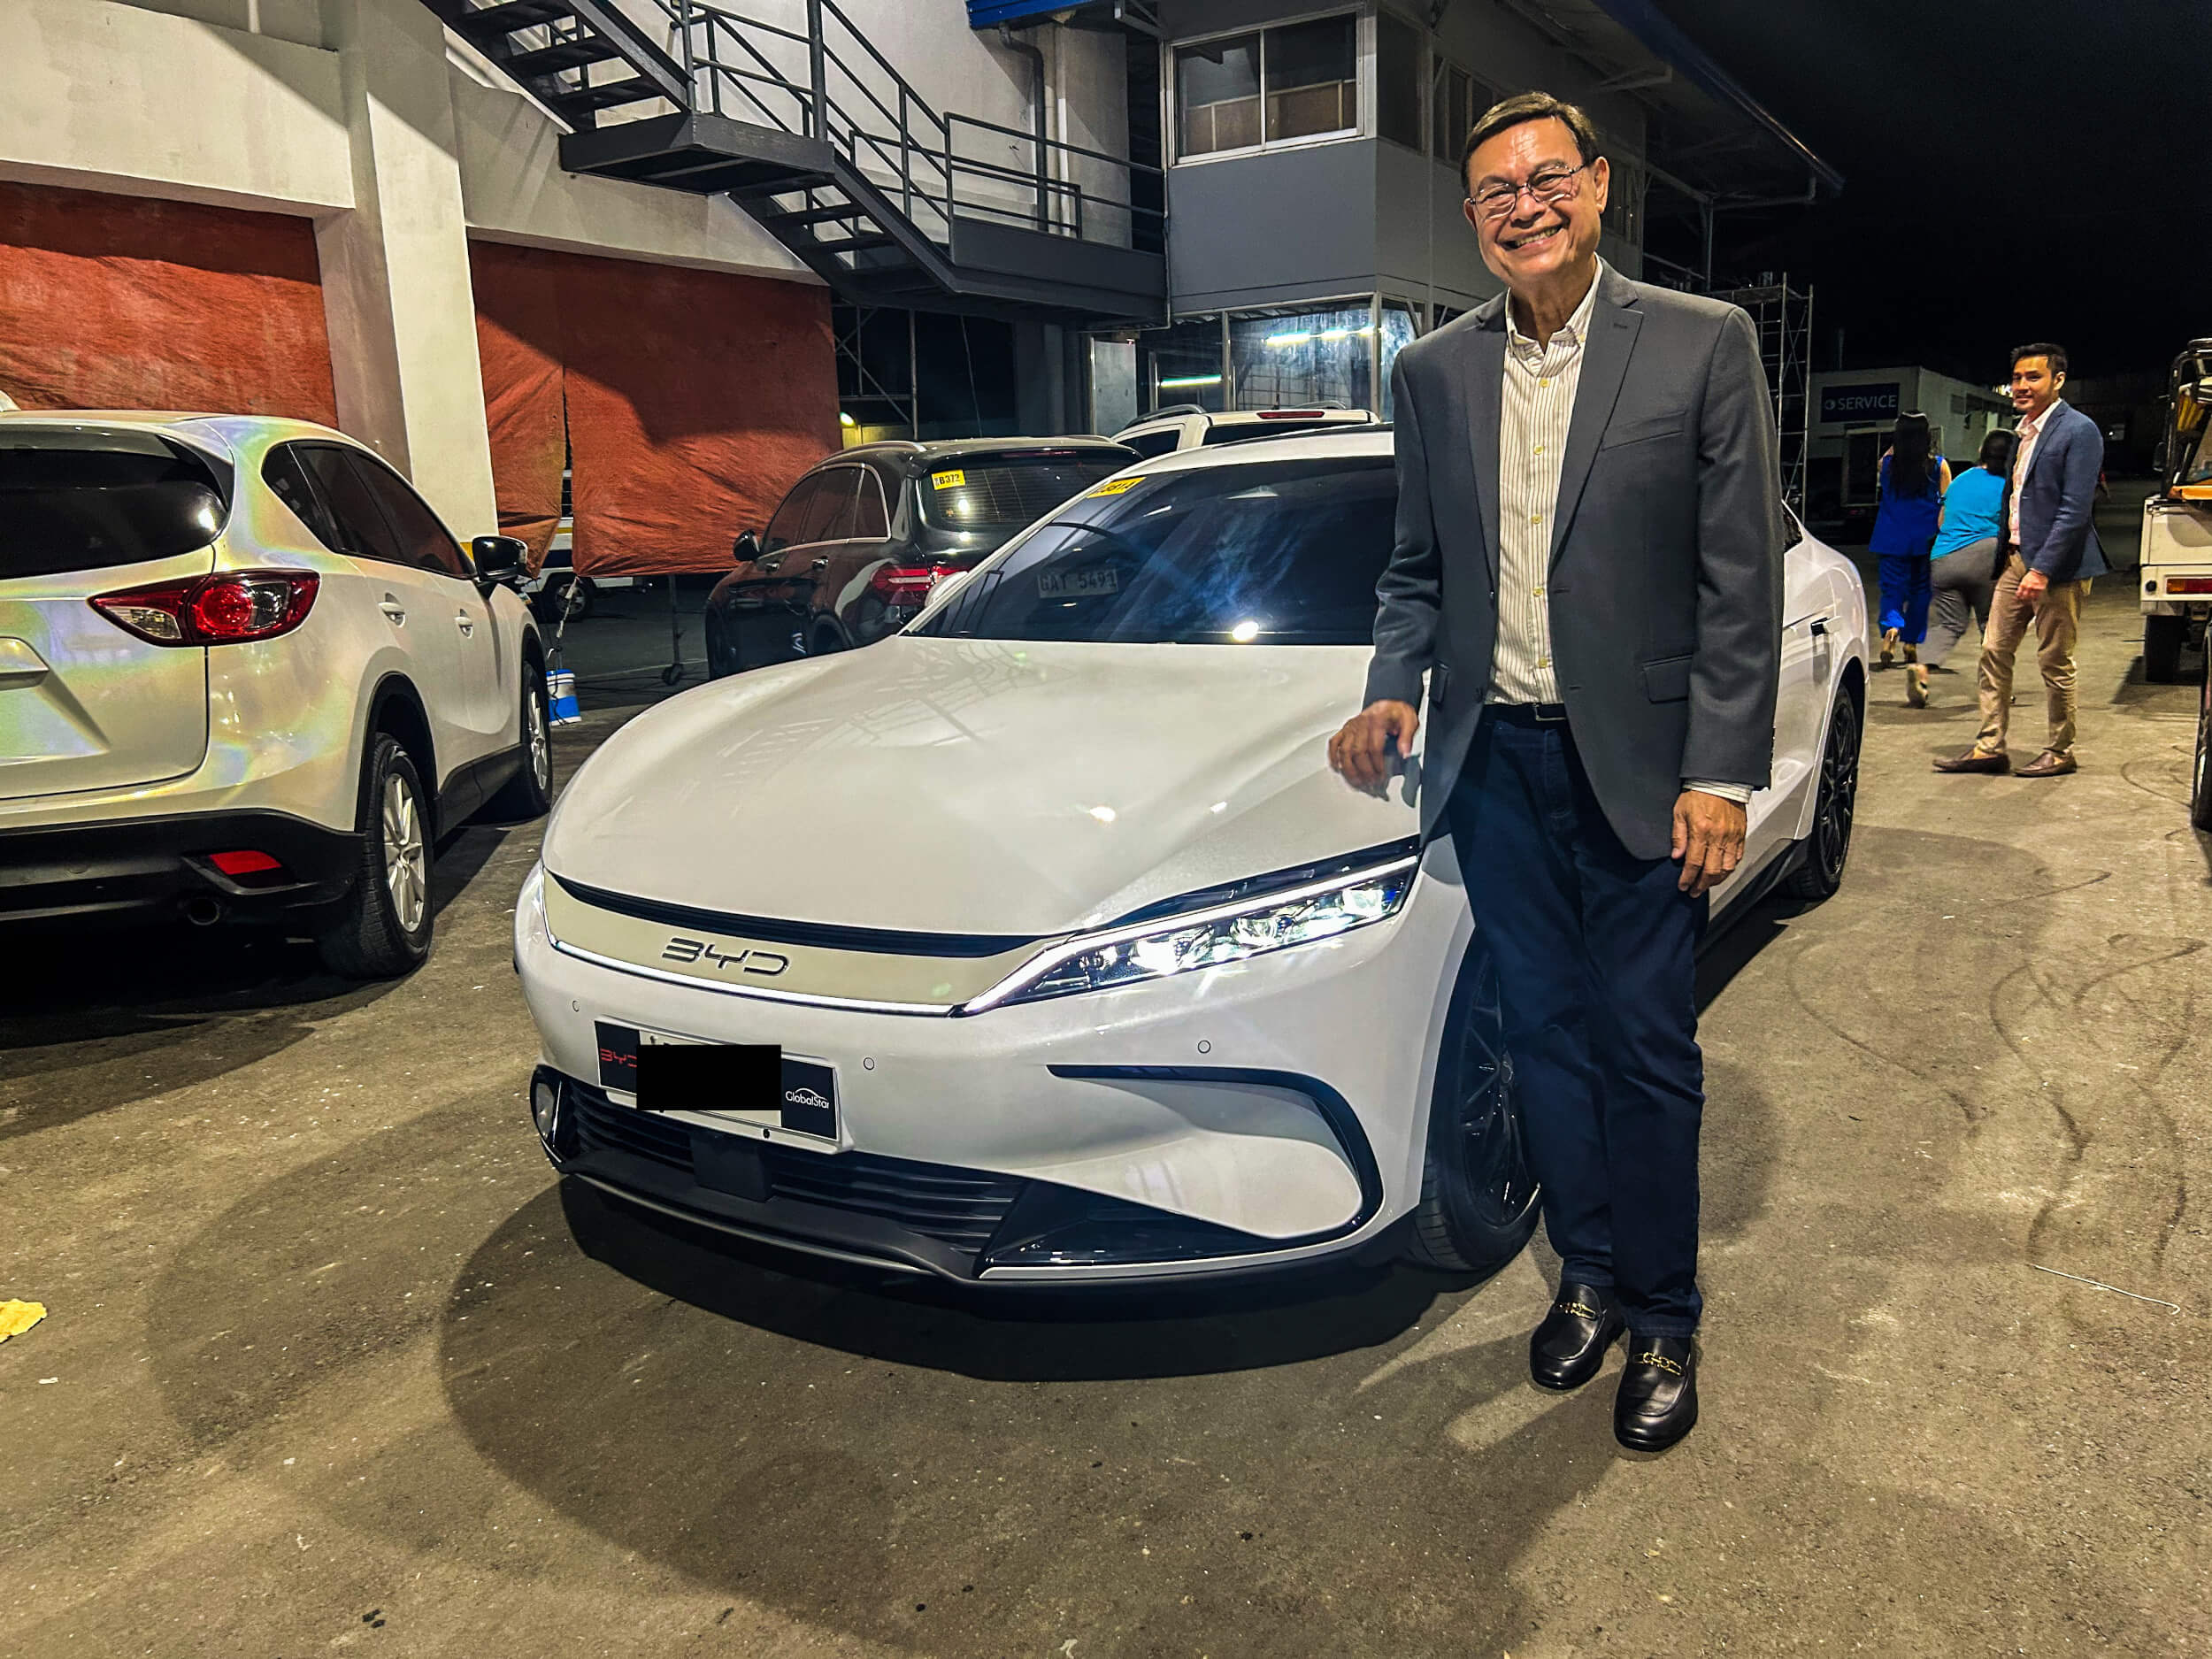 Entrepreneur Manuel “Bunny” Pages says nothing can compare to the convenience of a BYD Han, which drives smoothly and quietly. Although there are several public charging stations for electric vehicles, he prefers to recharge his car overnight in the comfort of his home.